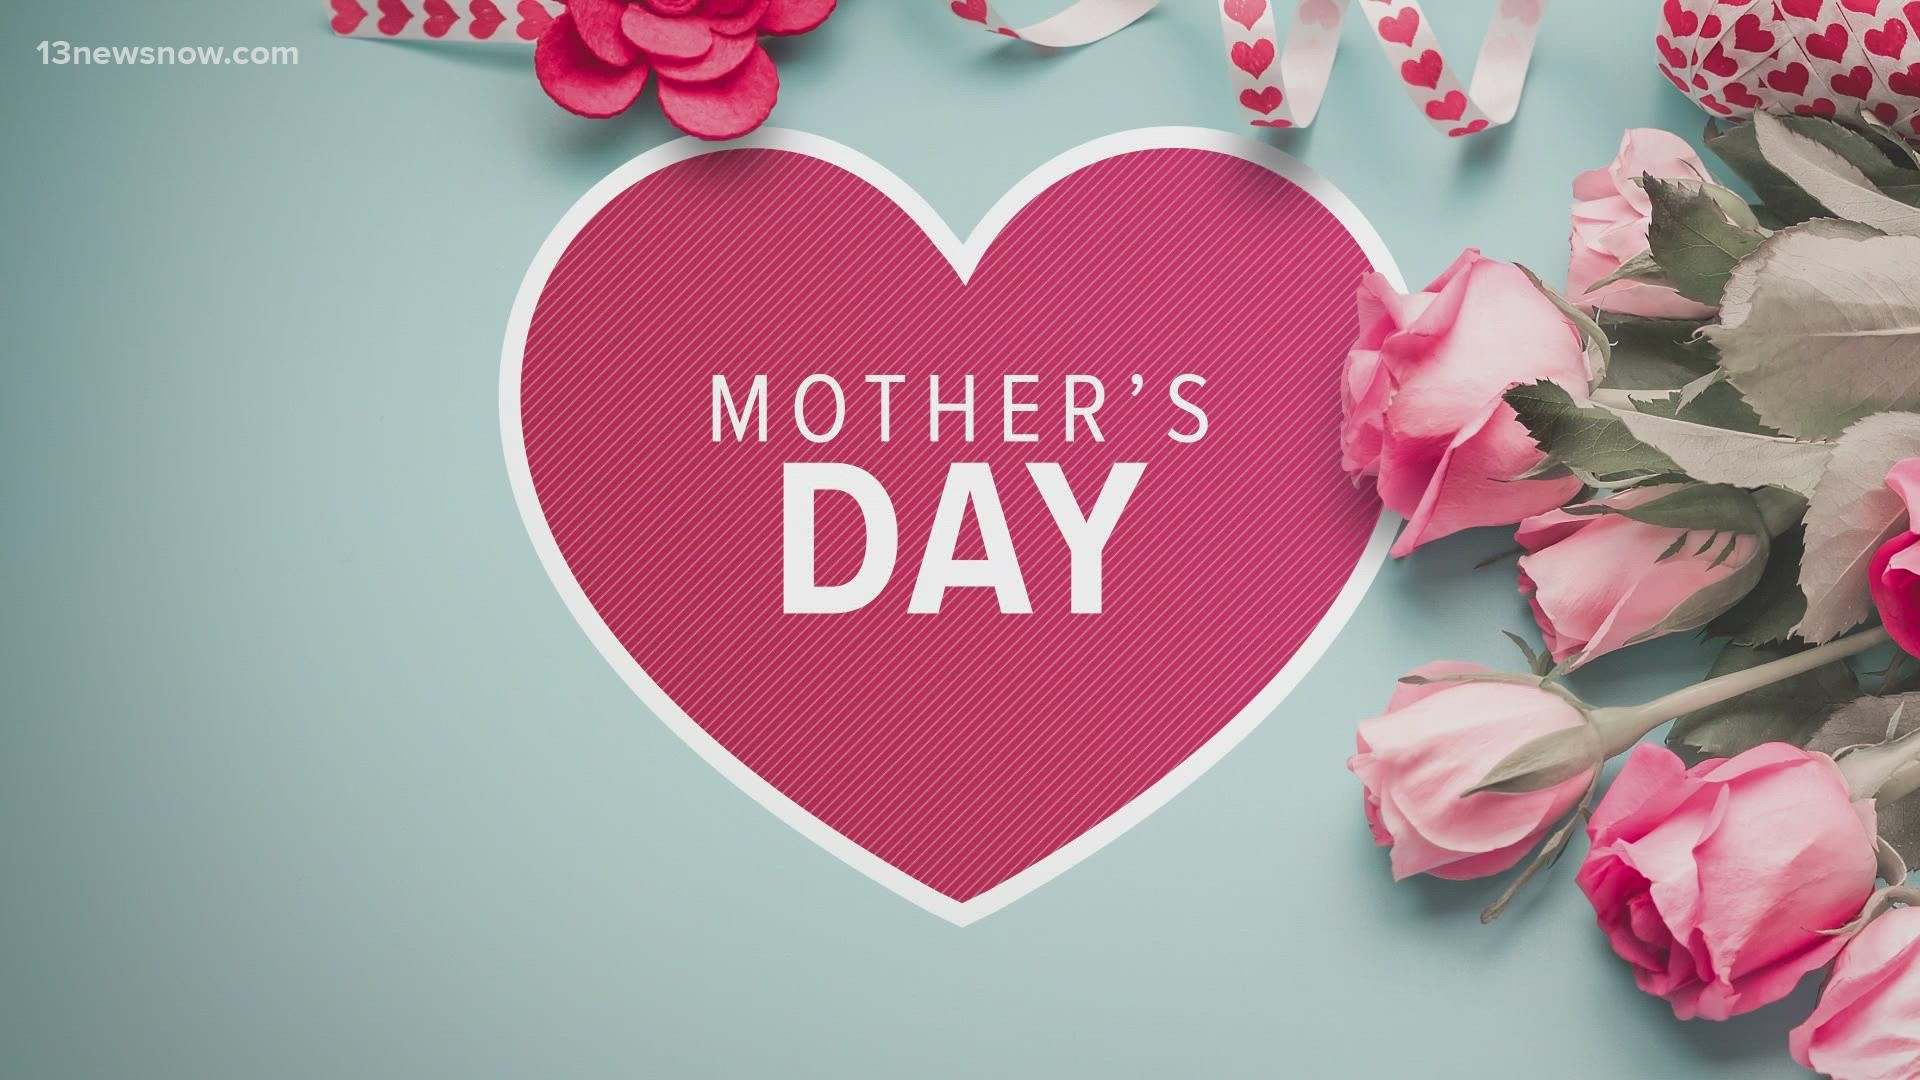 If you plan on giving the mom in your life a break from her regular schedule today, consider a nap or a simple home-cooked meal.